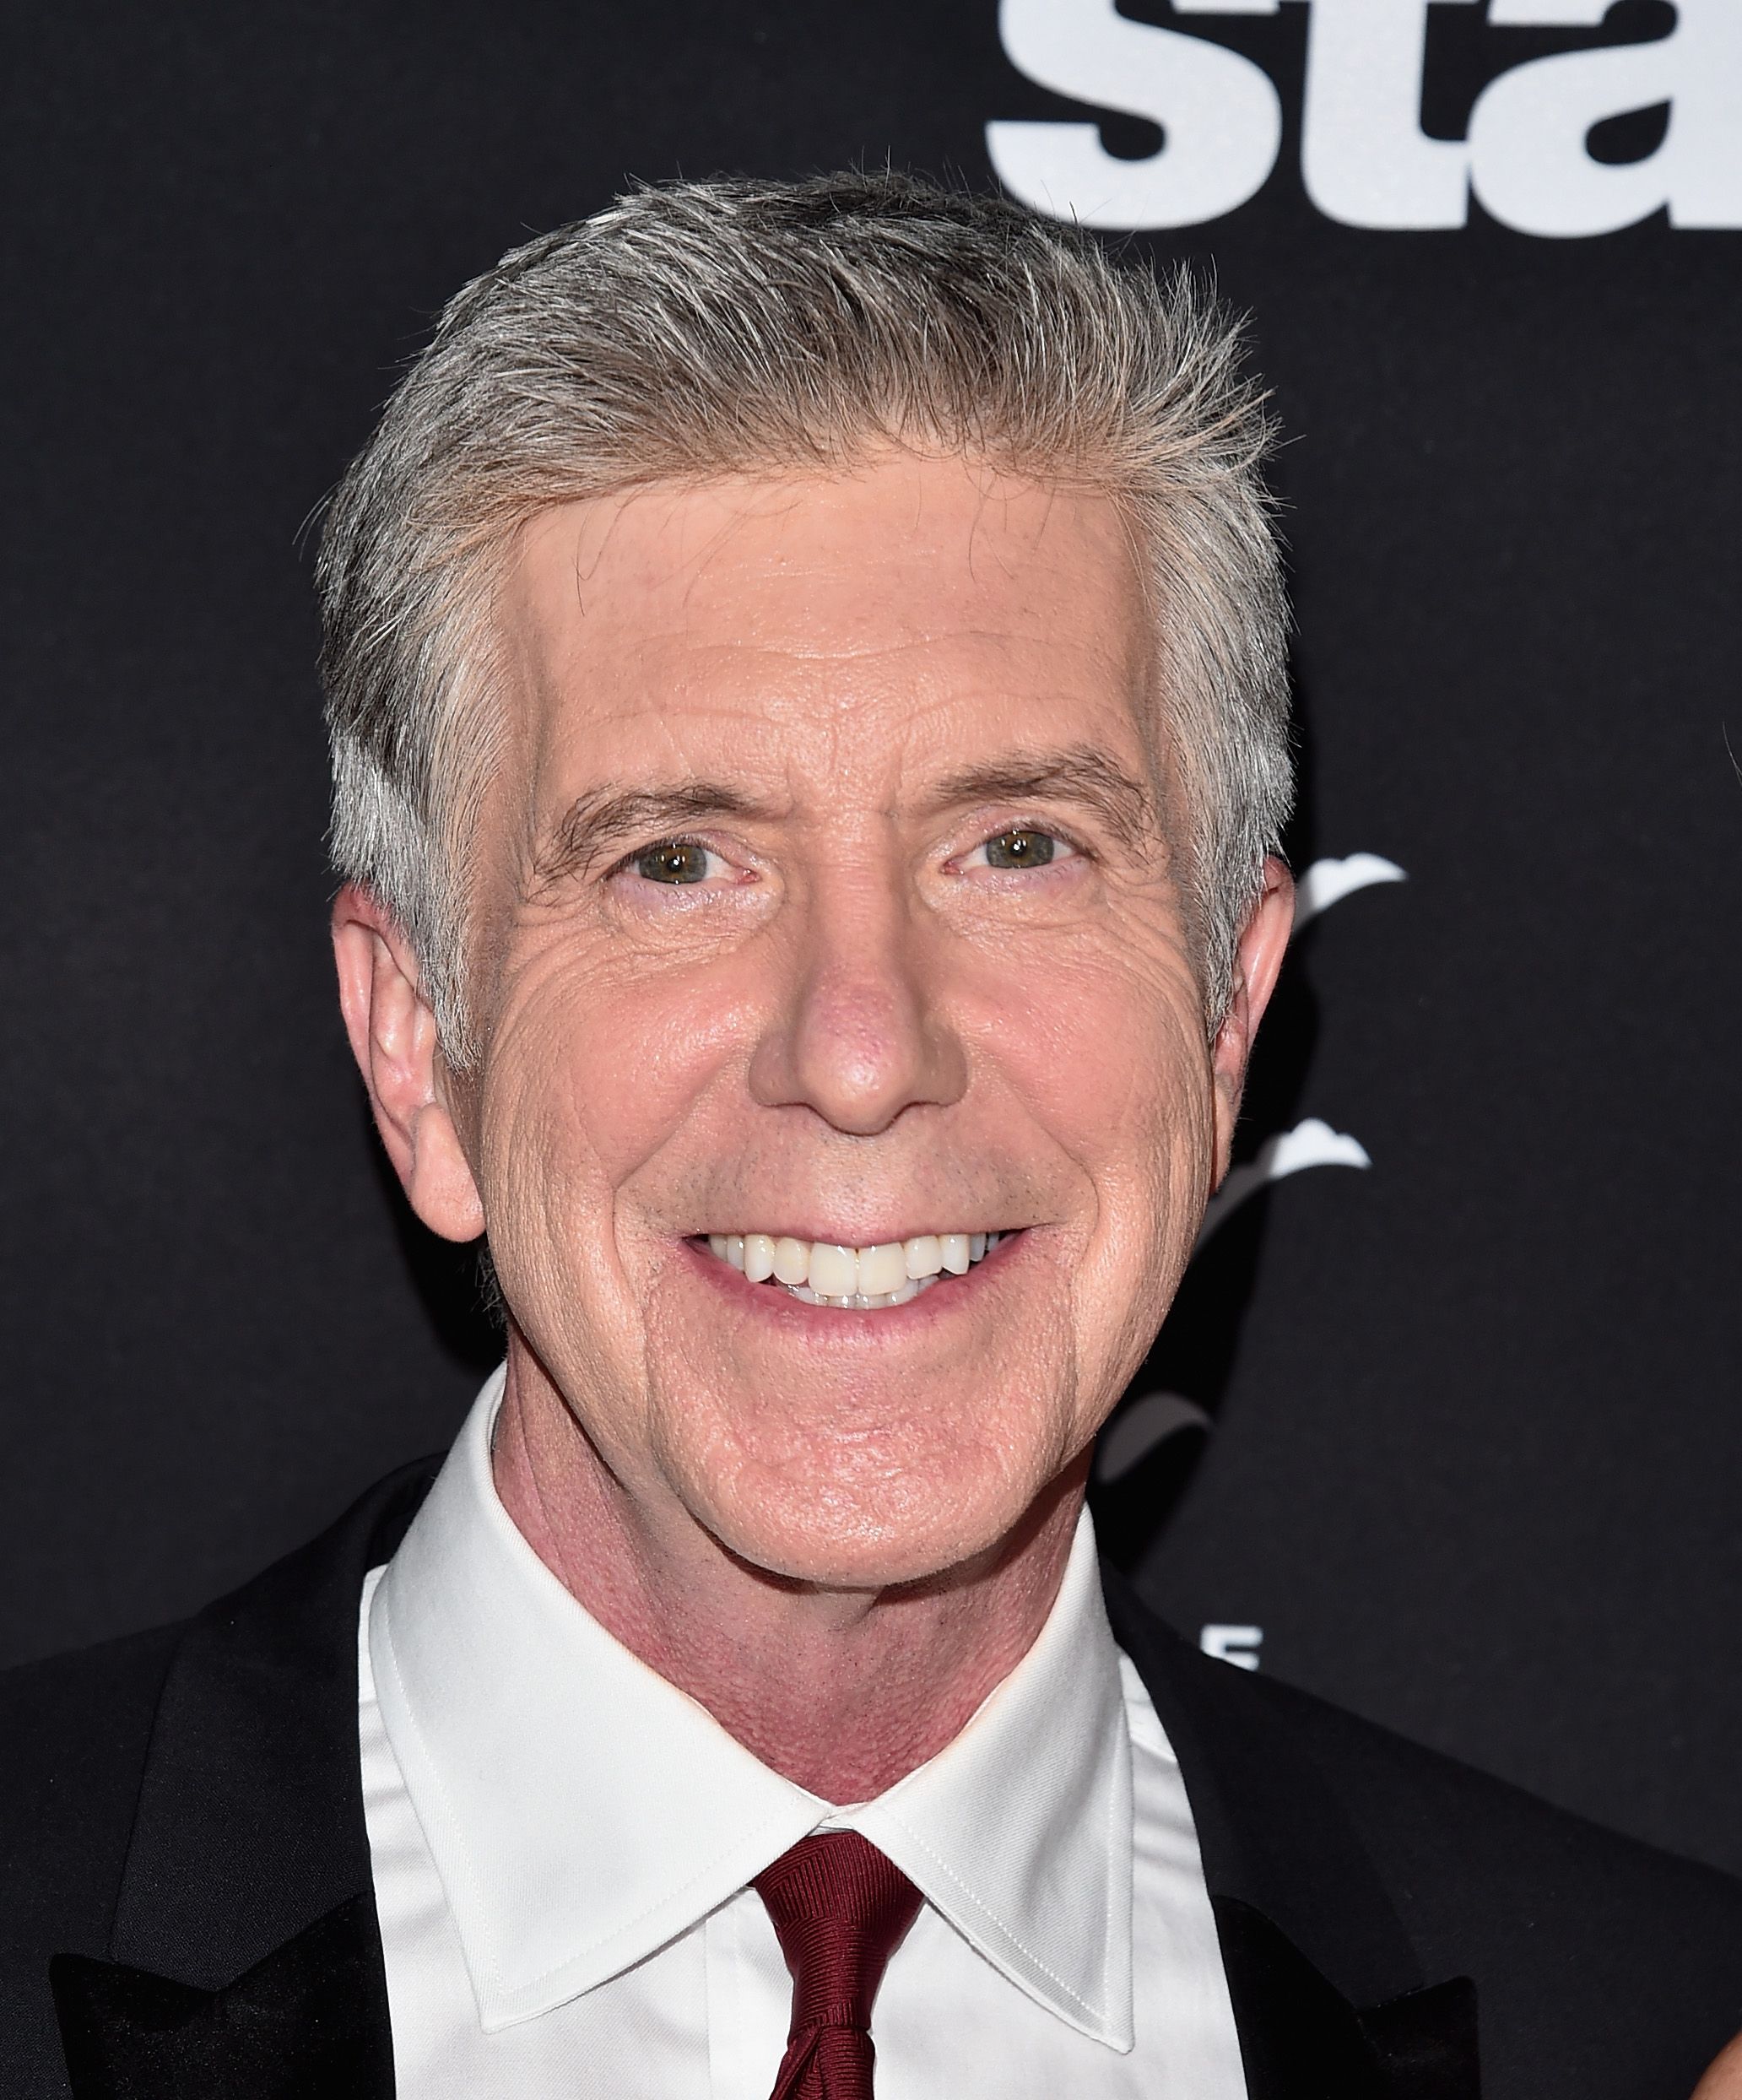 Tom Bergeron at ABC's "Dancing With The Stars" Season 23 Finale at The Grove on November 22, 2016 in Los Angeles, California. | Photo: Getty Images